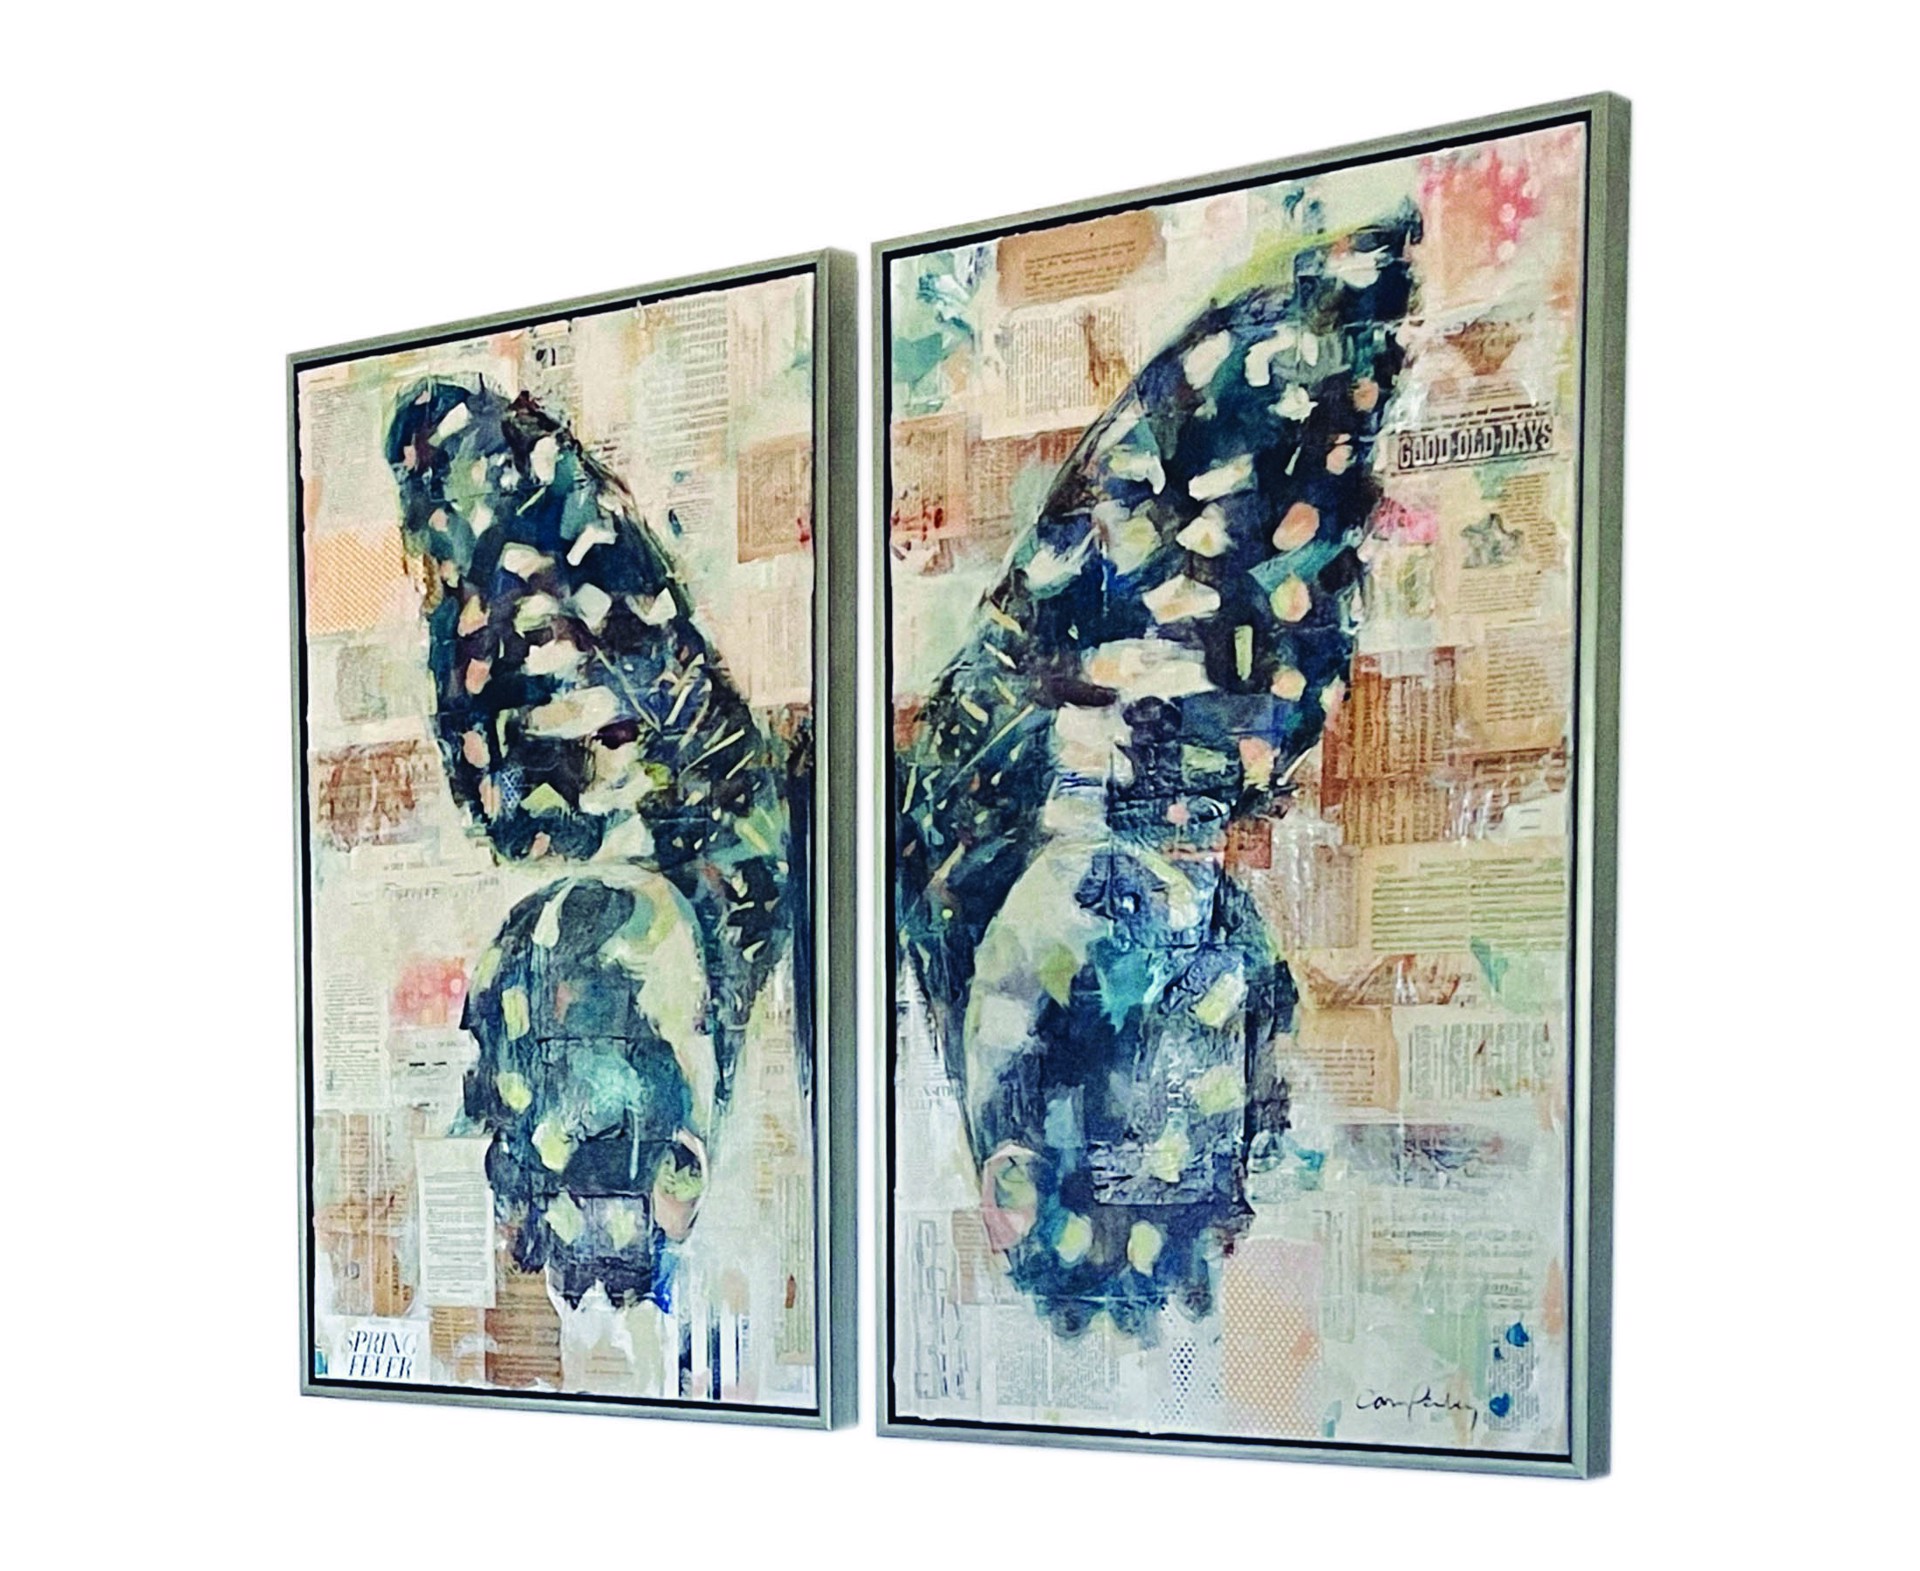 Original Mixed Media Painting Of A Butterfly Split Between Diptych Canvas In Blues With Newspaper Collage